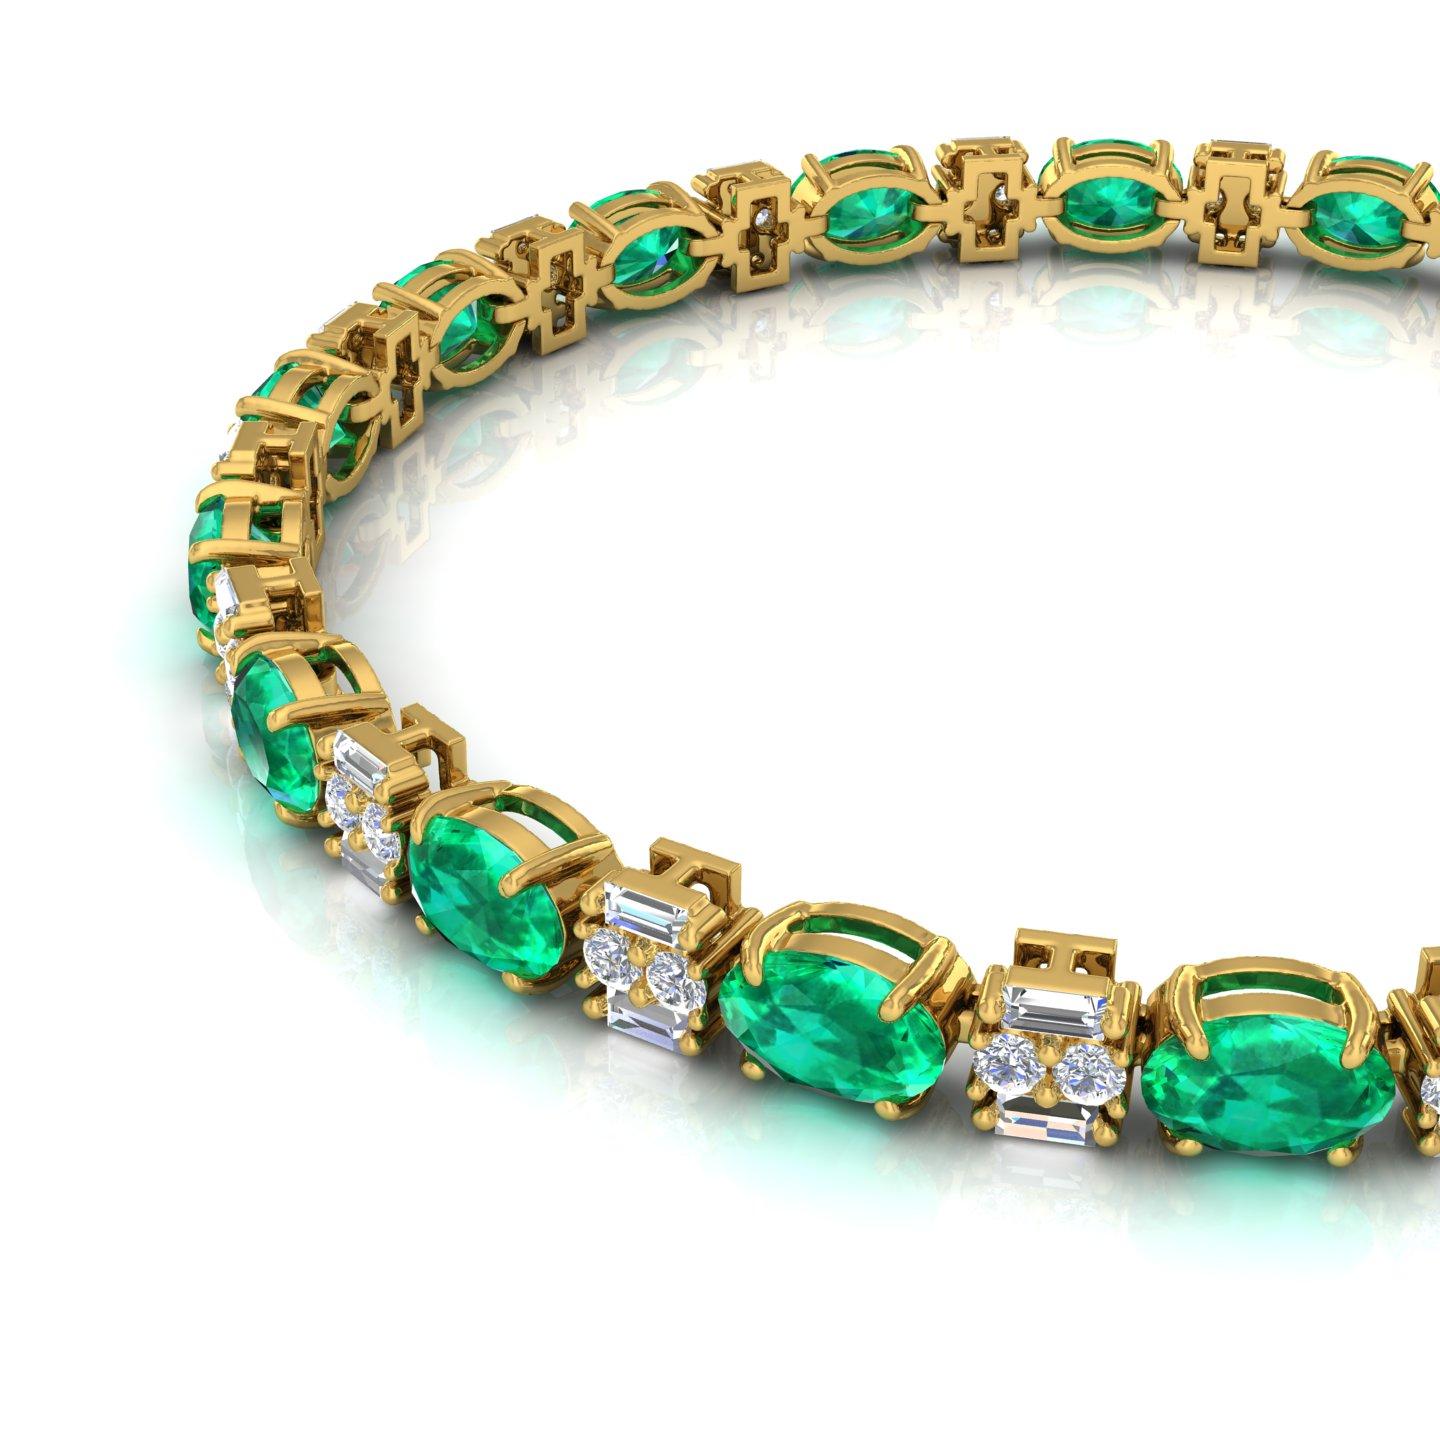 Item Code :- SEBR-4208A
Gross Wt. :- 13.21 gm
18k Solid Yellow Gold Wt. :- 11.34 gm
Natural Diamond Wt. :- 1.40 Ct. ( AVERAGE DIAMOND CLARITY SI1-SI2 & COLOR H-I )
Zambian Emerald Wt. :- 7.94 Ct. 
Bracelet Length :- 7 Inches Long

✦